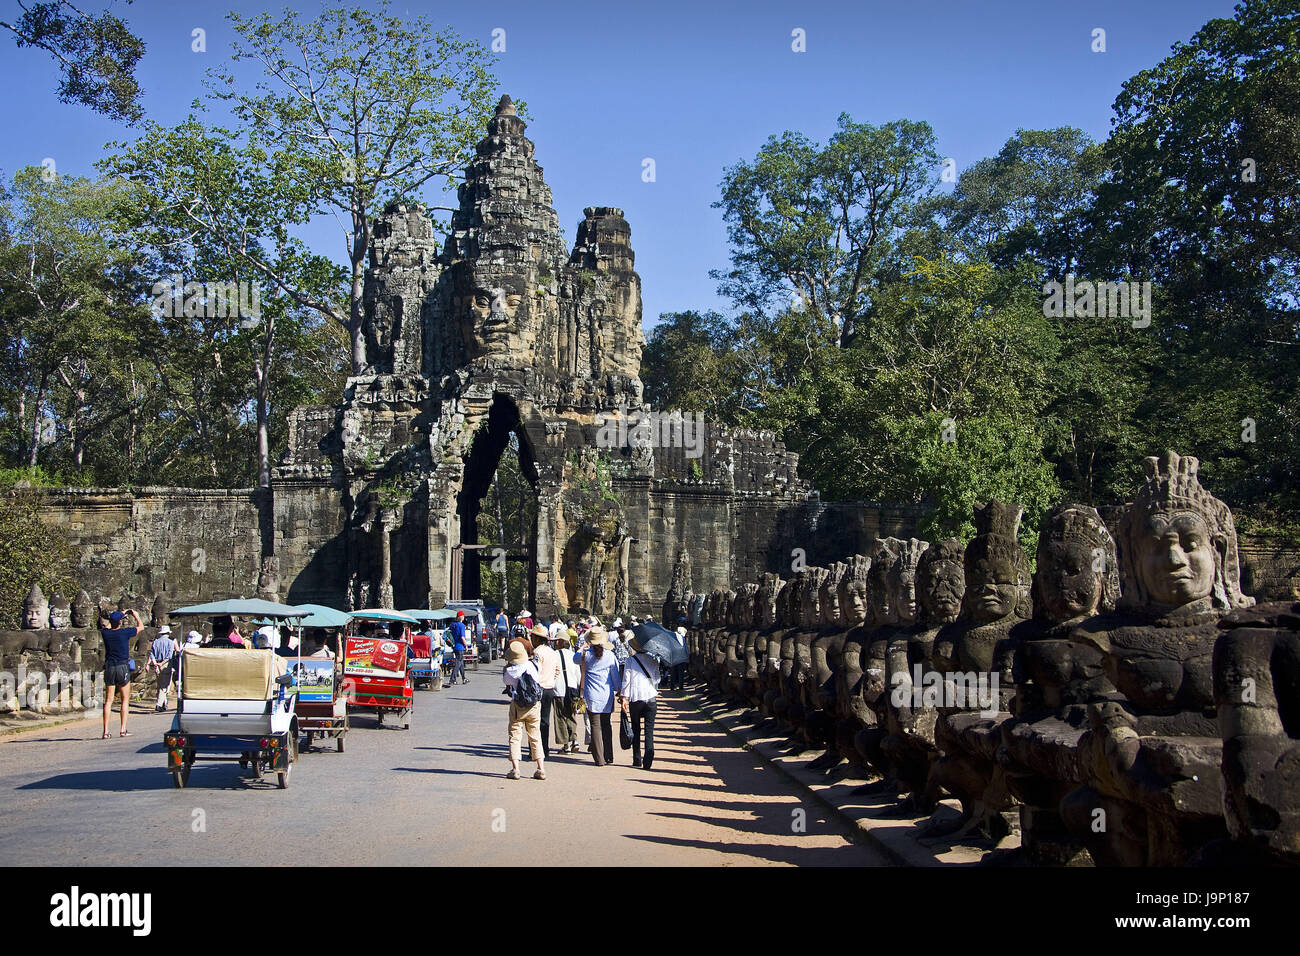 Cambodia,Siem Reap,Angkor Wat,Angkor Tohm temple,south gate,stone characters,guards,tourists, Stock Photo